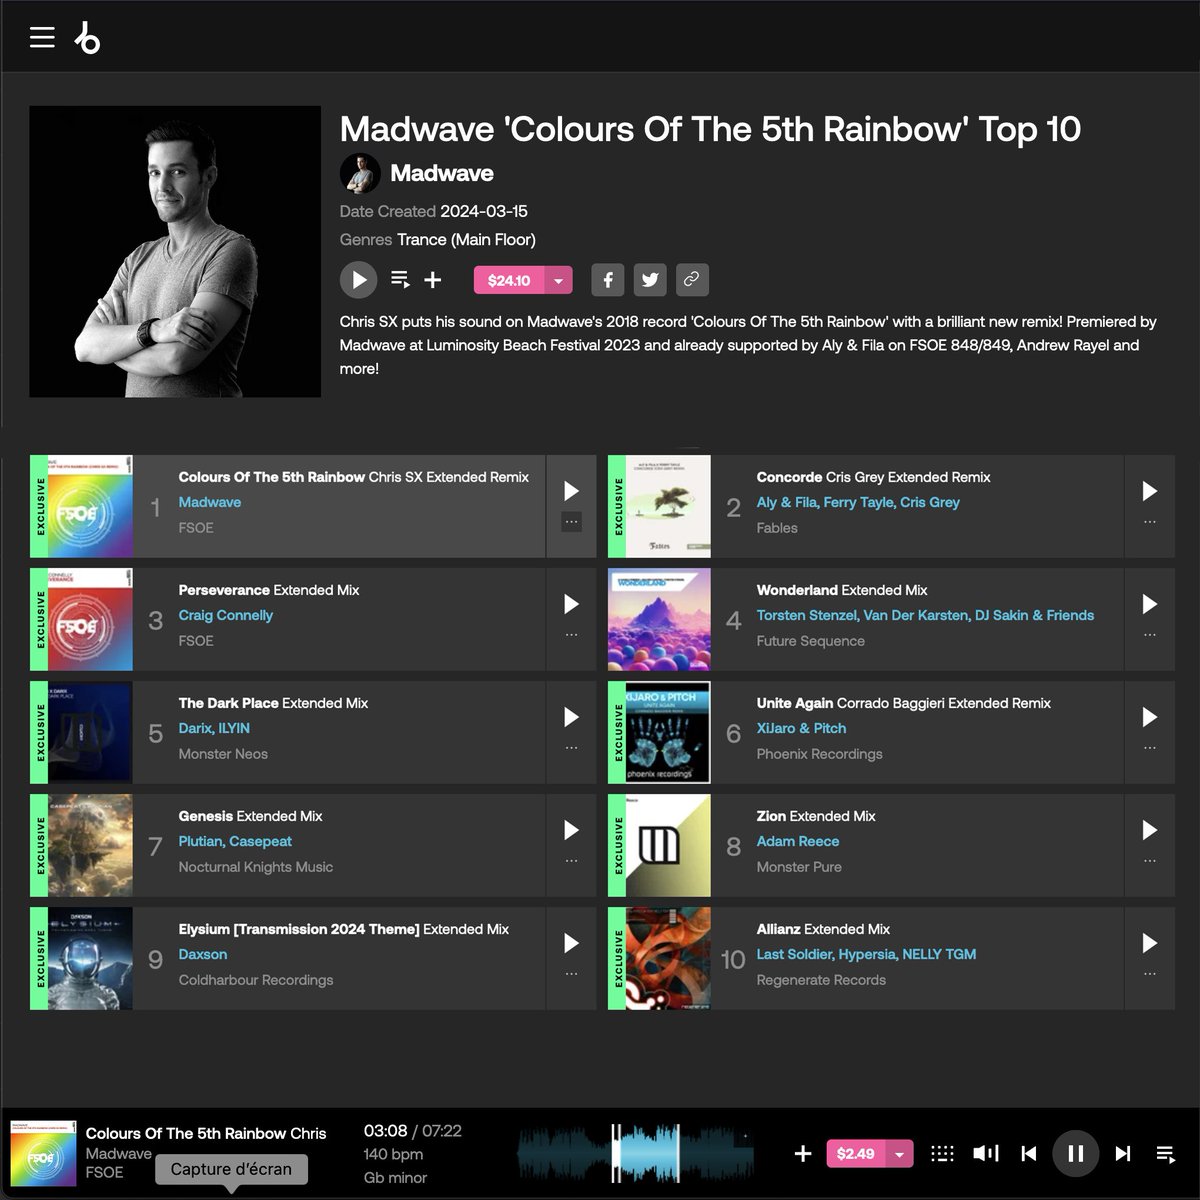 Featured on the @beatport Trance (Main Floor) landing page, my current 'Colours Of The 5th Rainbow' Top 10 #trancemusic favourite tracks beatport.com/chart/madwave-…